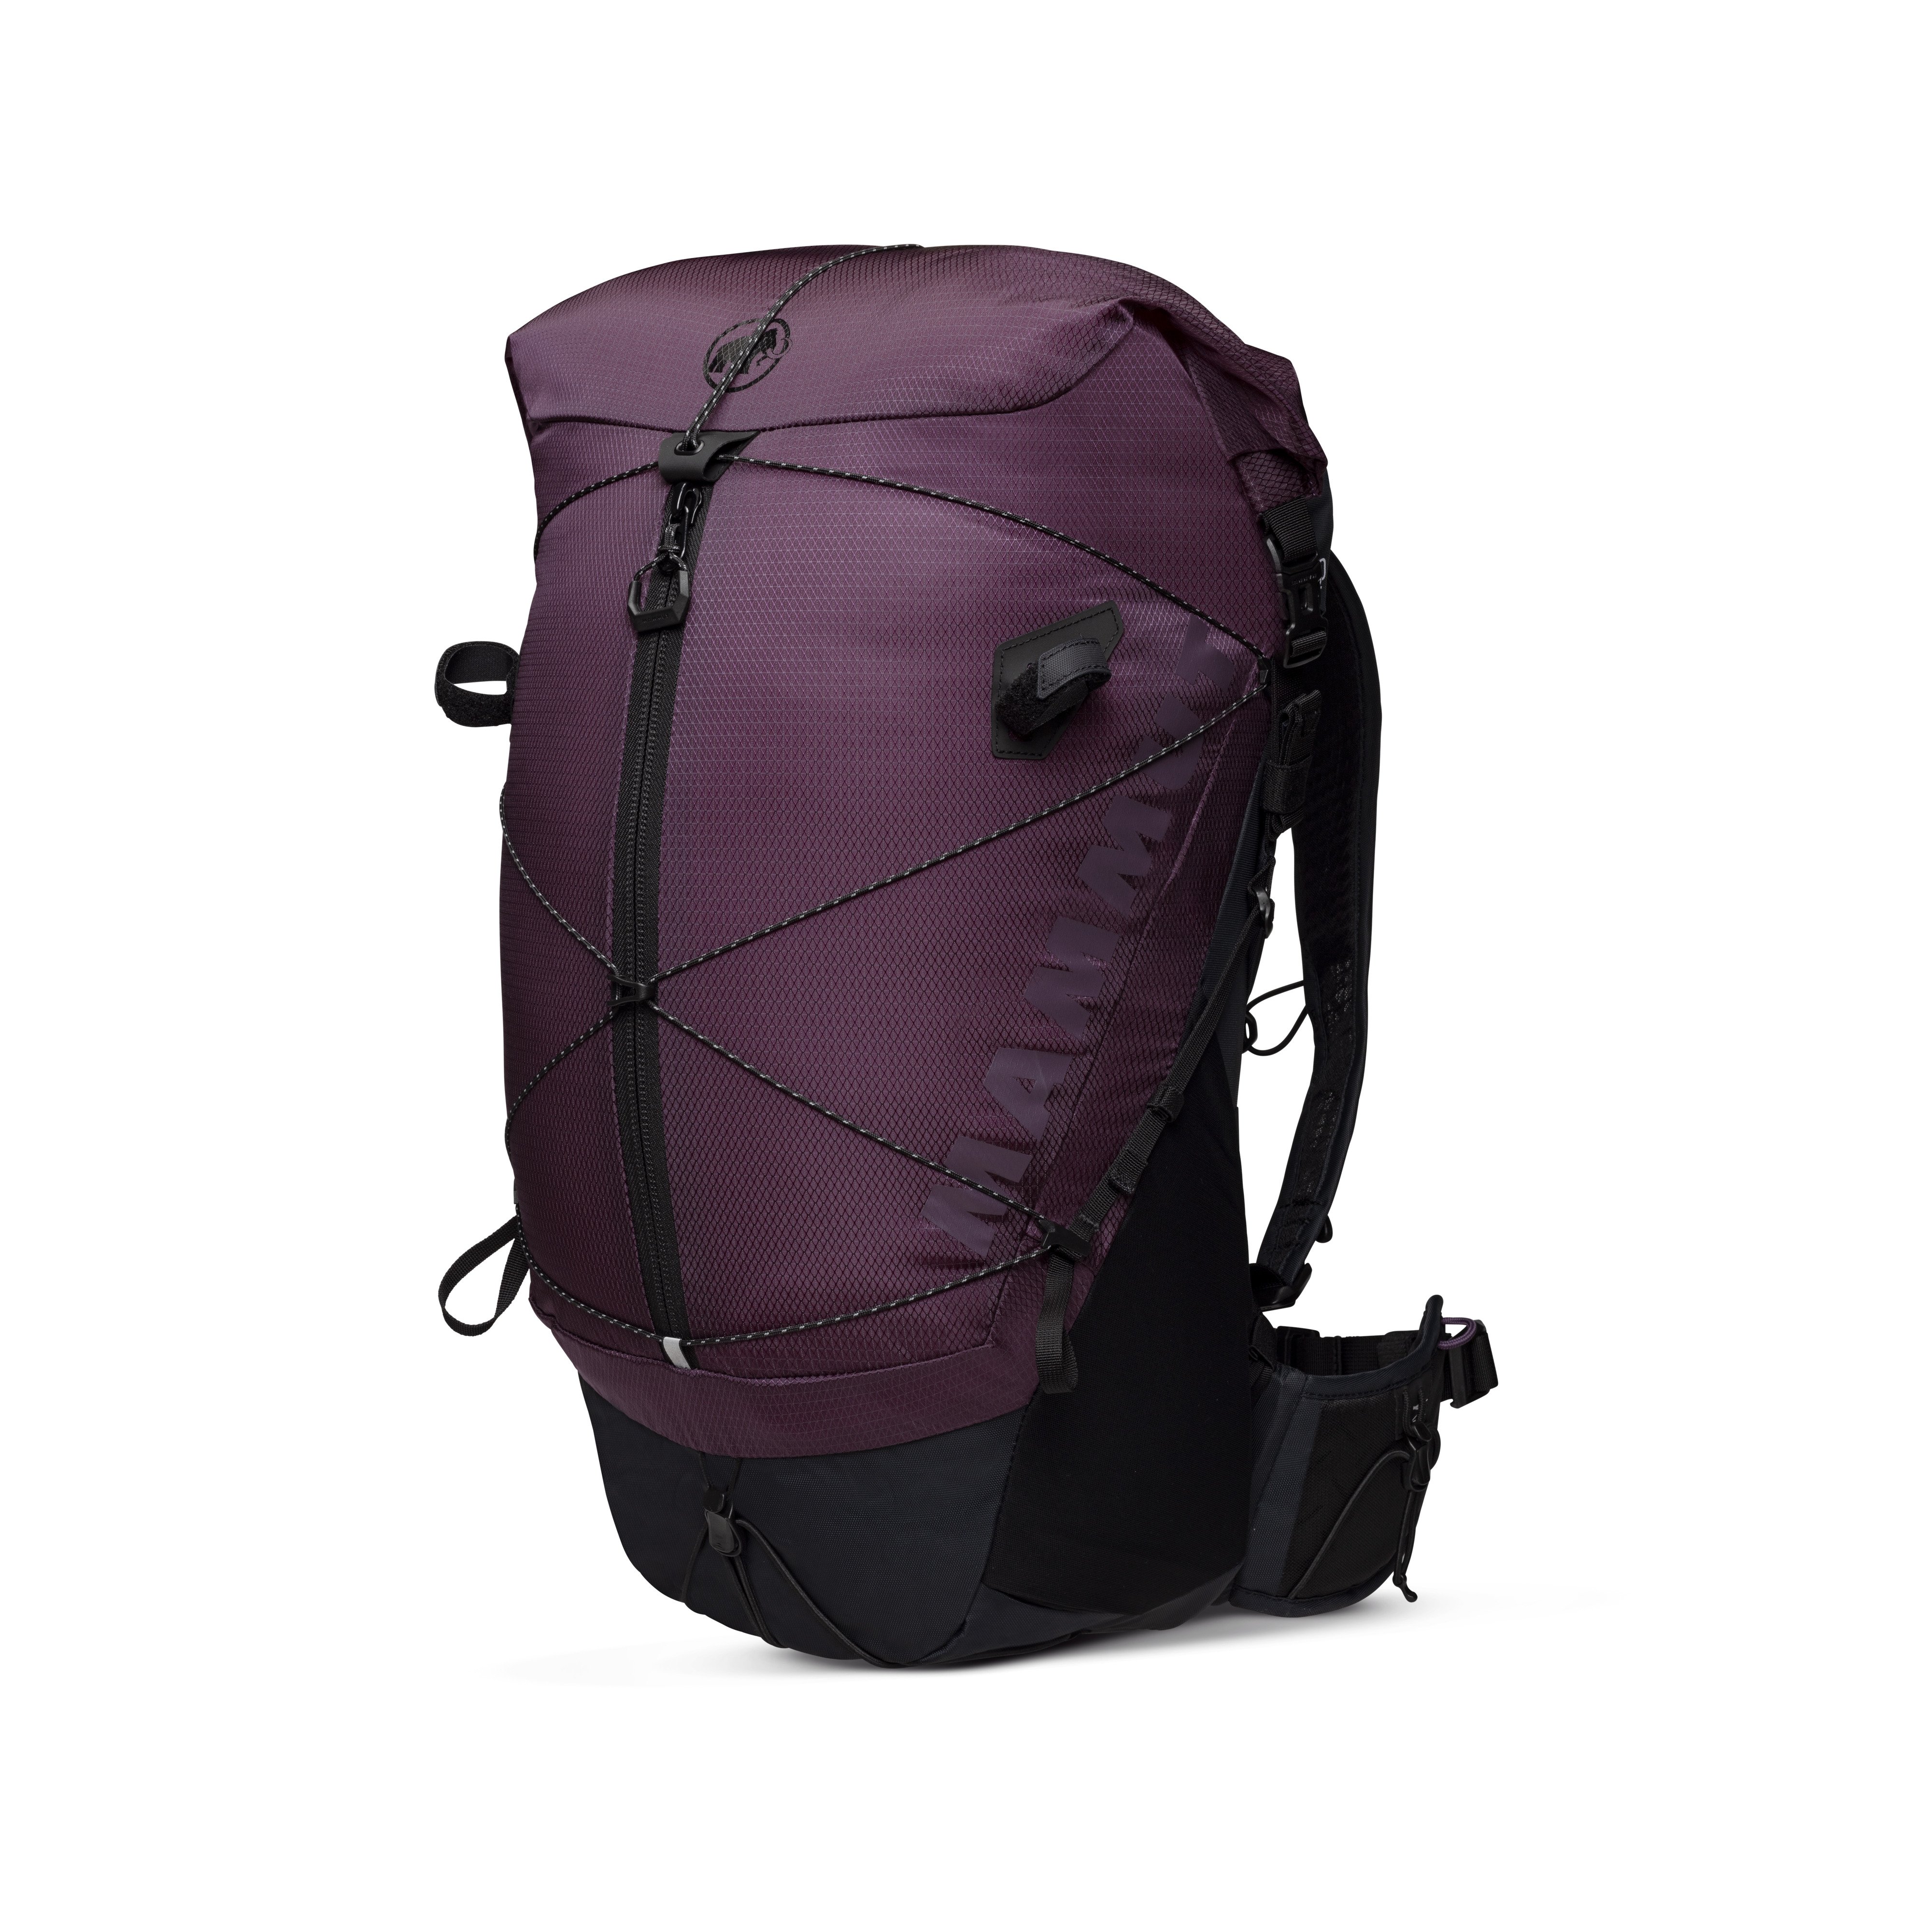 Ducan Spine 28-35 Women - galaxy-black, 28-35 L product image